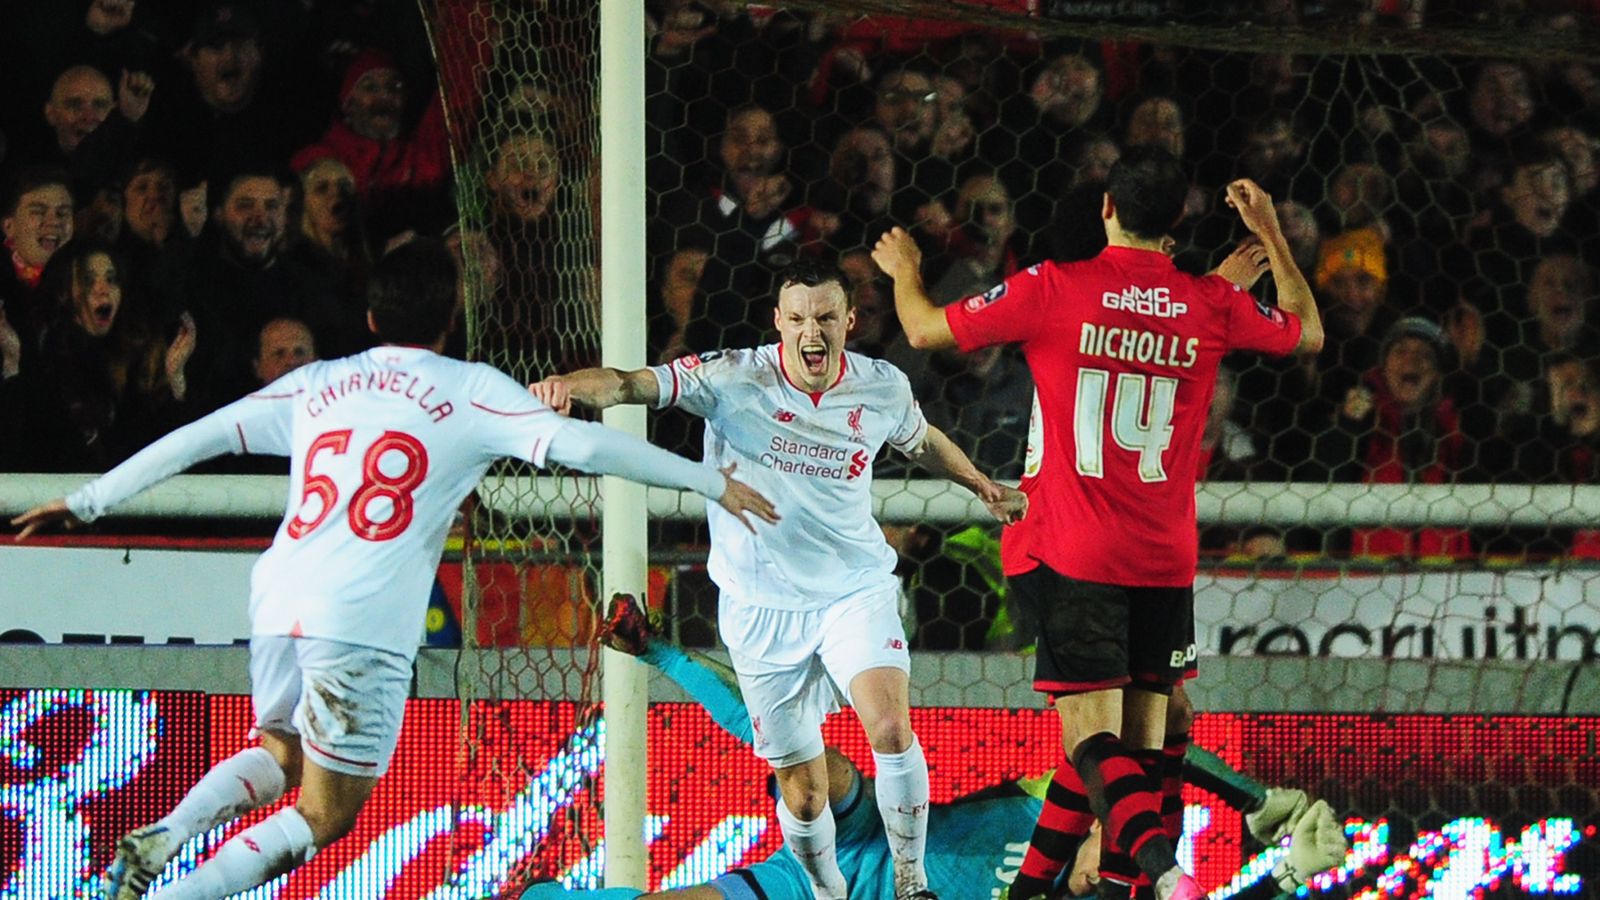 Exeter 2 - 2 Liverpool - Match Report & Highlights1600 x 900